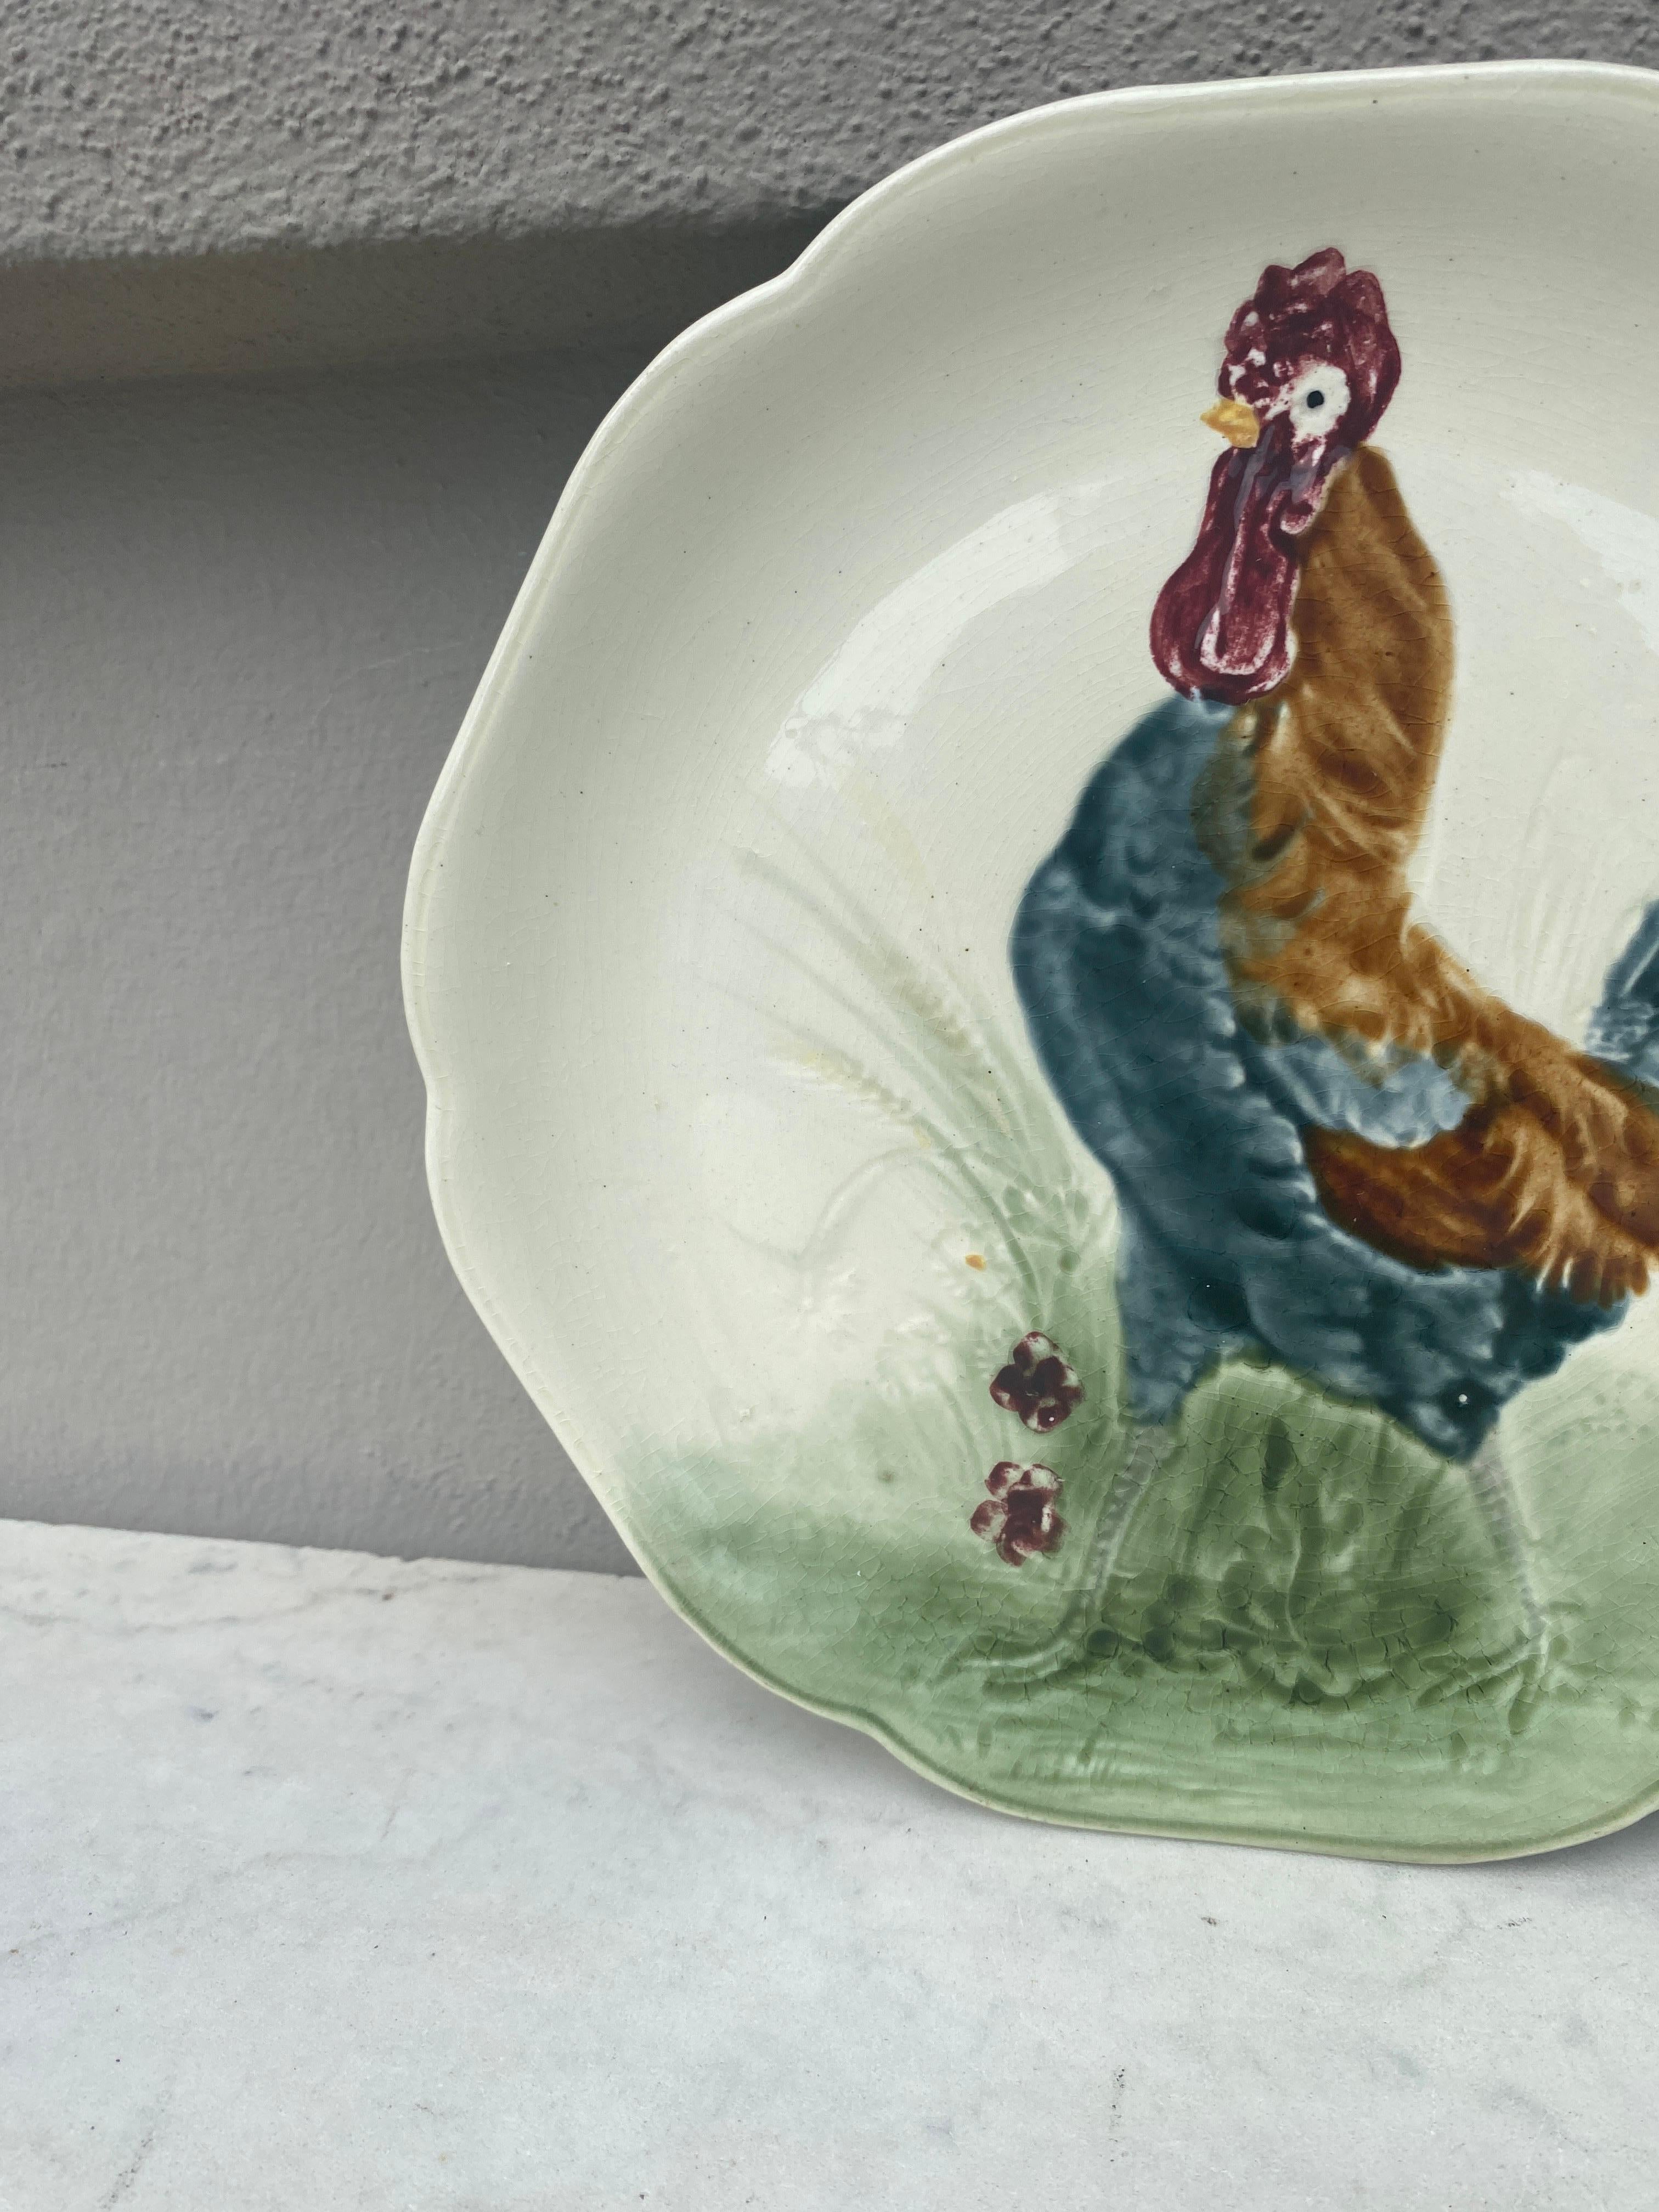 Majolica plate with rooster signed Hippolyte Boulenger Choisy le Roi, circa 1890.
The manufacture of Choisy le Roi was one of the most important manufacture at the end of 19th century, they produced very high quality ceramics of all kinds as